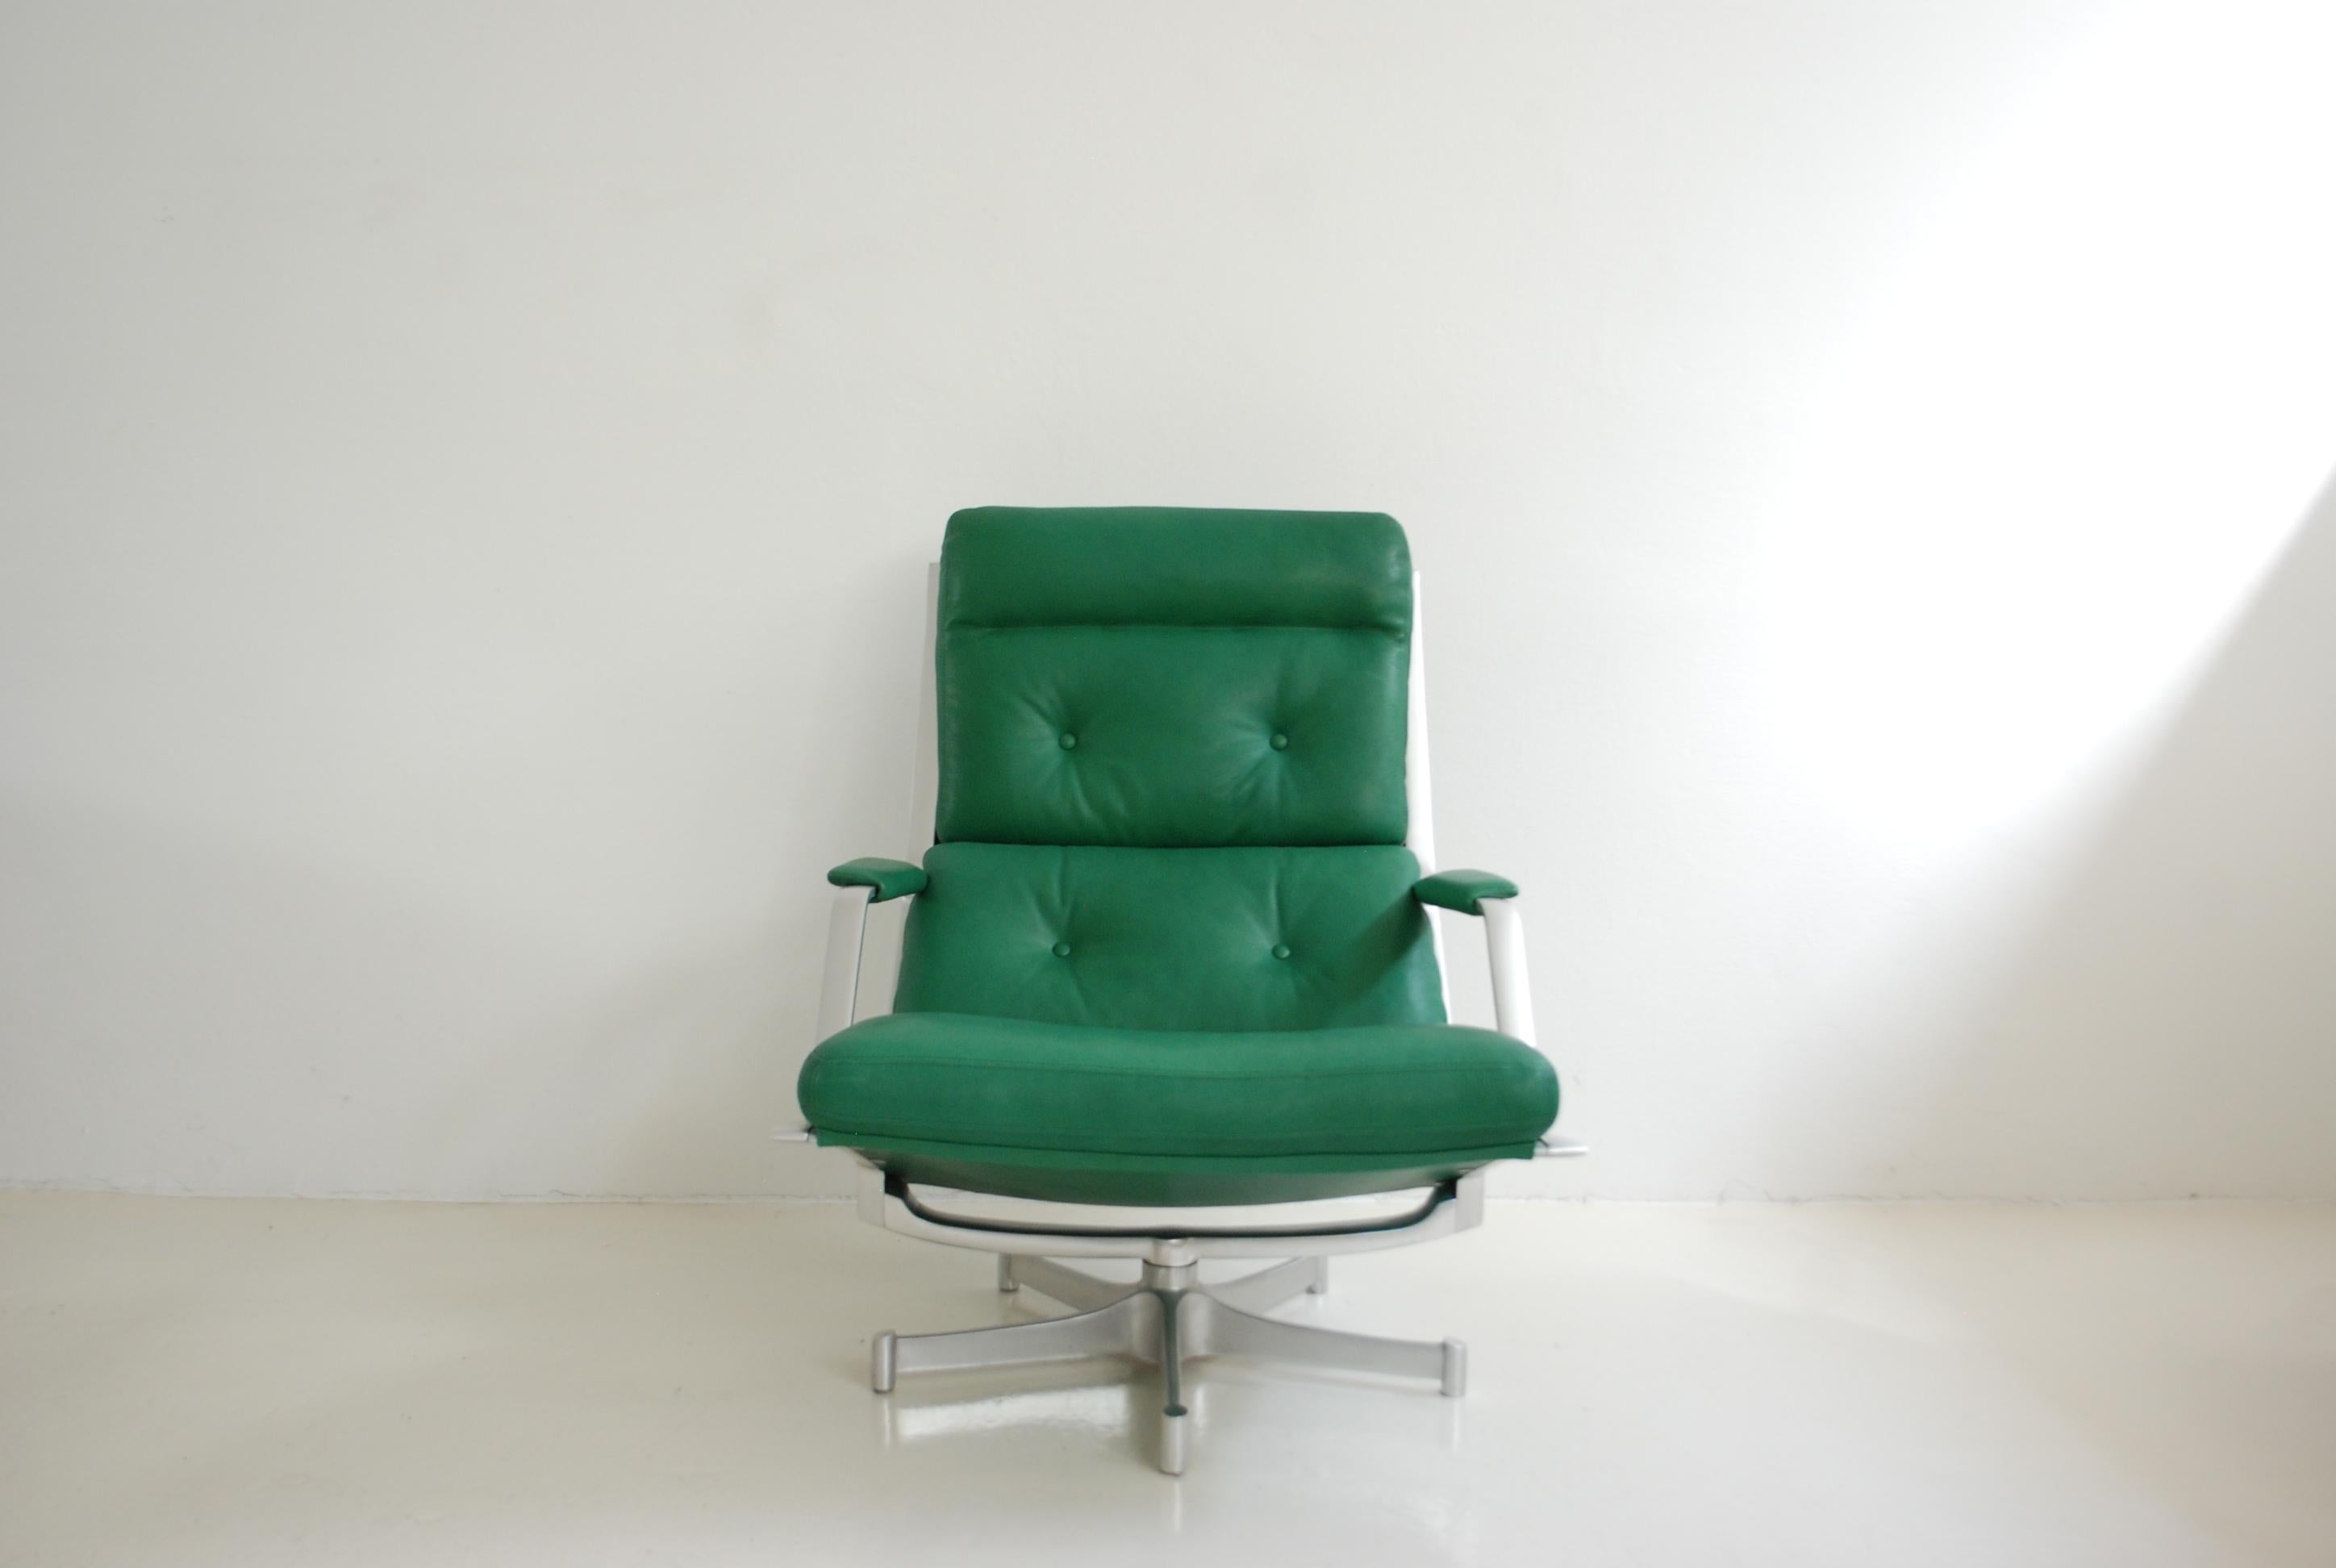 This lounge chair FK 85 was made by Jorgen Kastholm & Preben Fabricius for Kill international.
The lounge chair has a swivel aluminium frame and  Kelly green leather.
It was new upholstered with premium aniline leather.
The aluminium frame has some